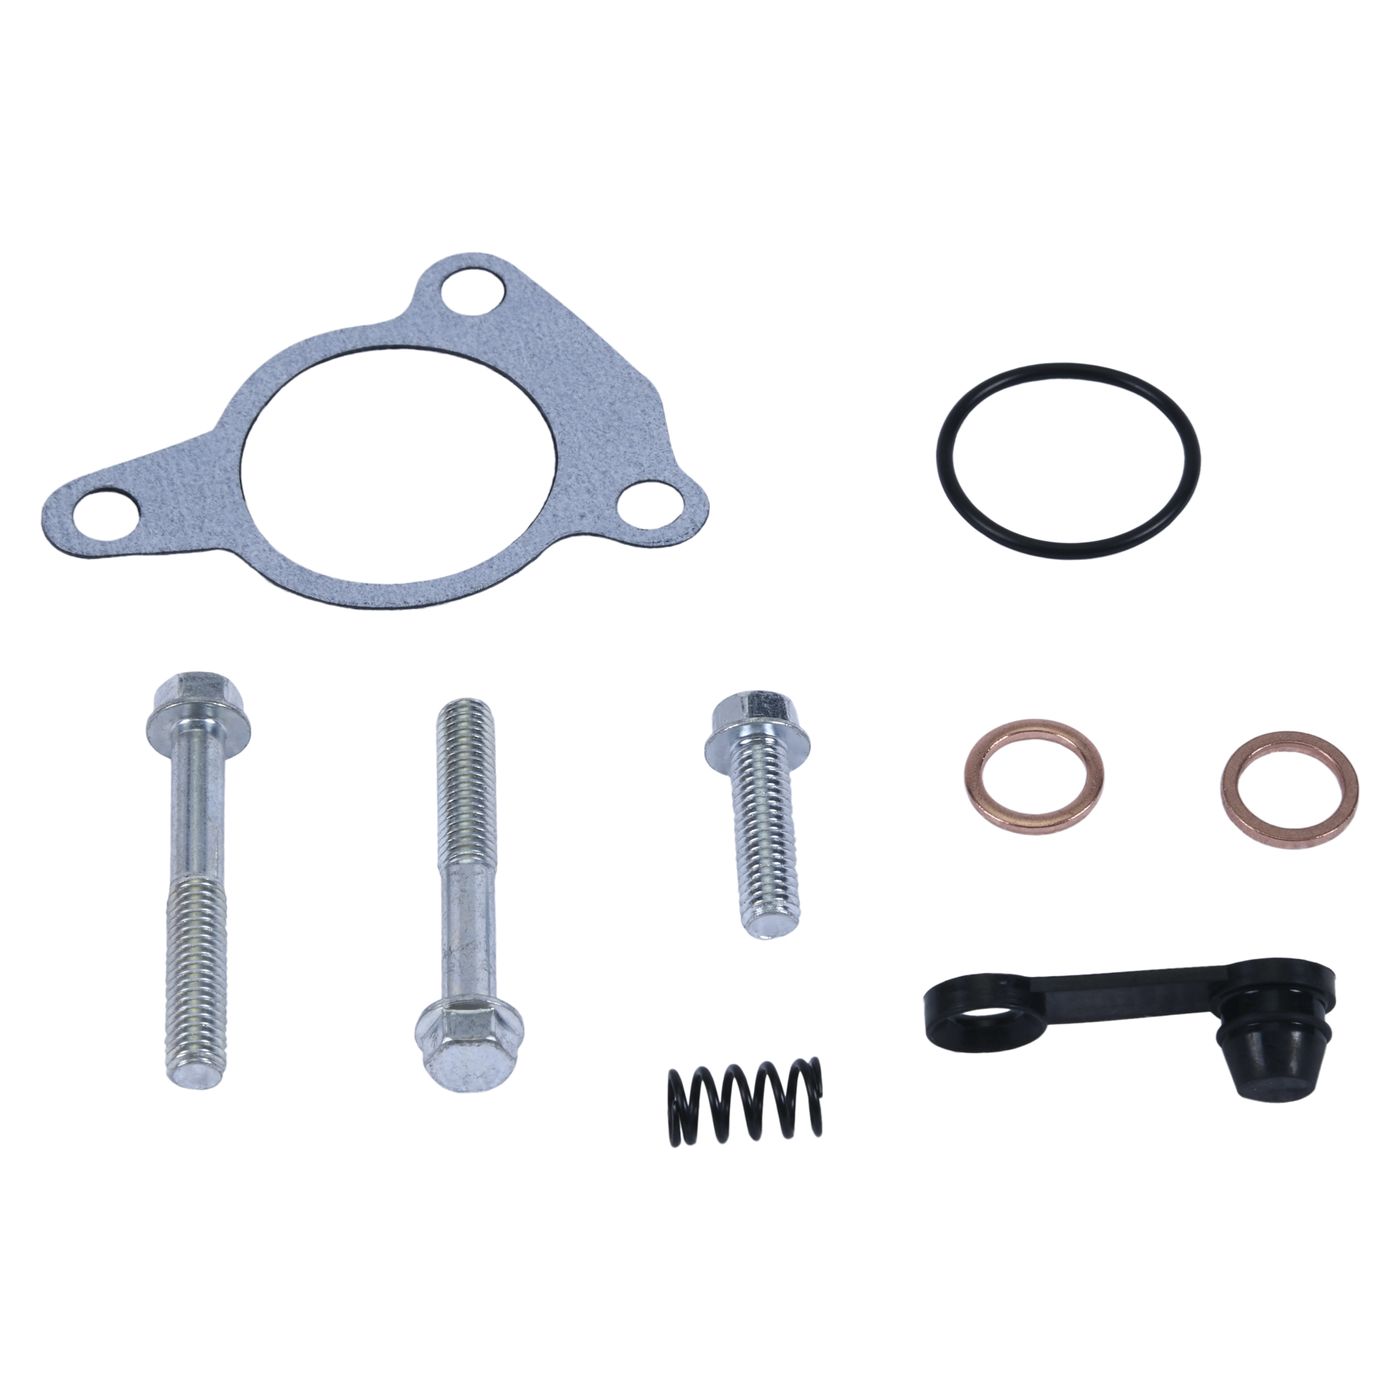 Wrp Clutch Slave Cylinder Kits - WRP186039 image